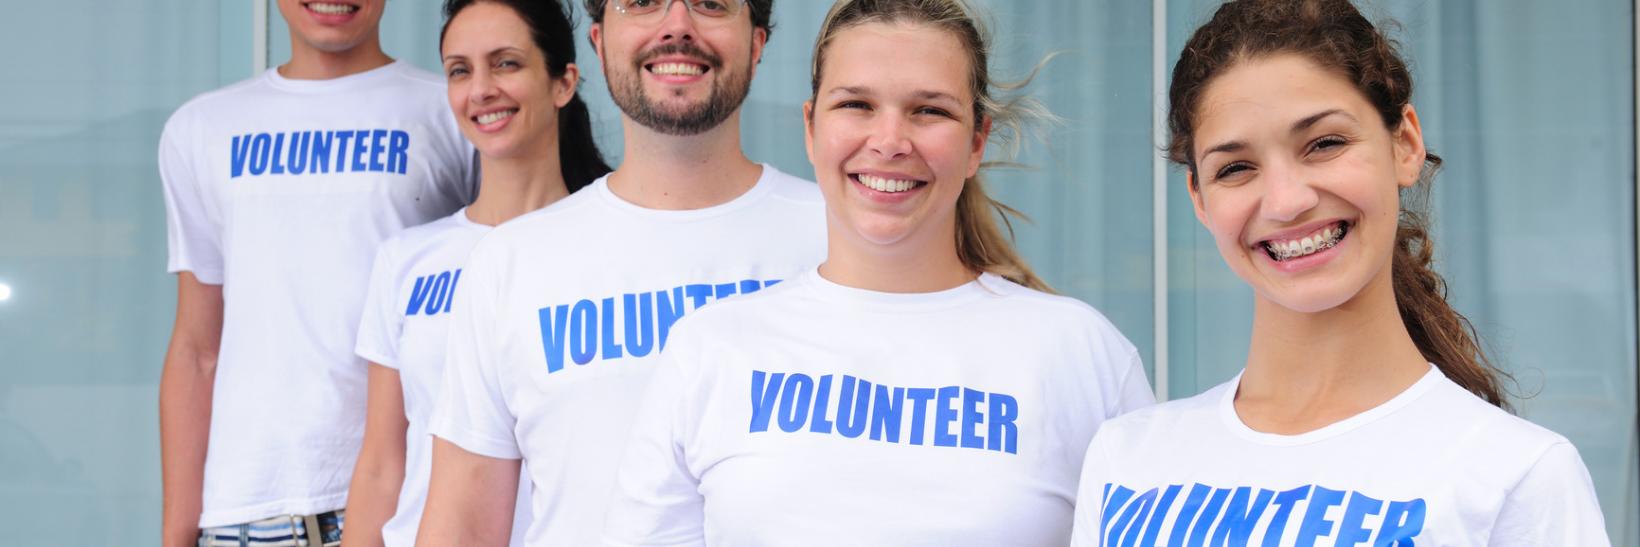 Find out how you can volunteer and maintain status.